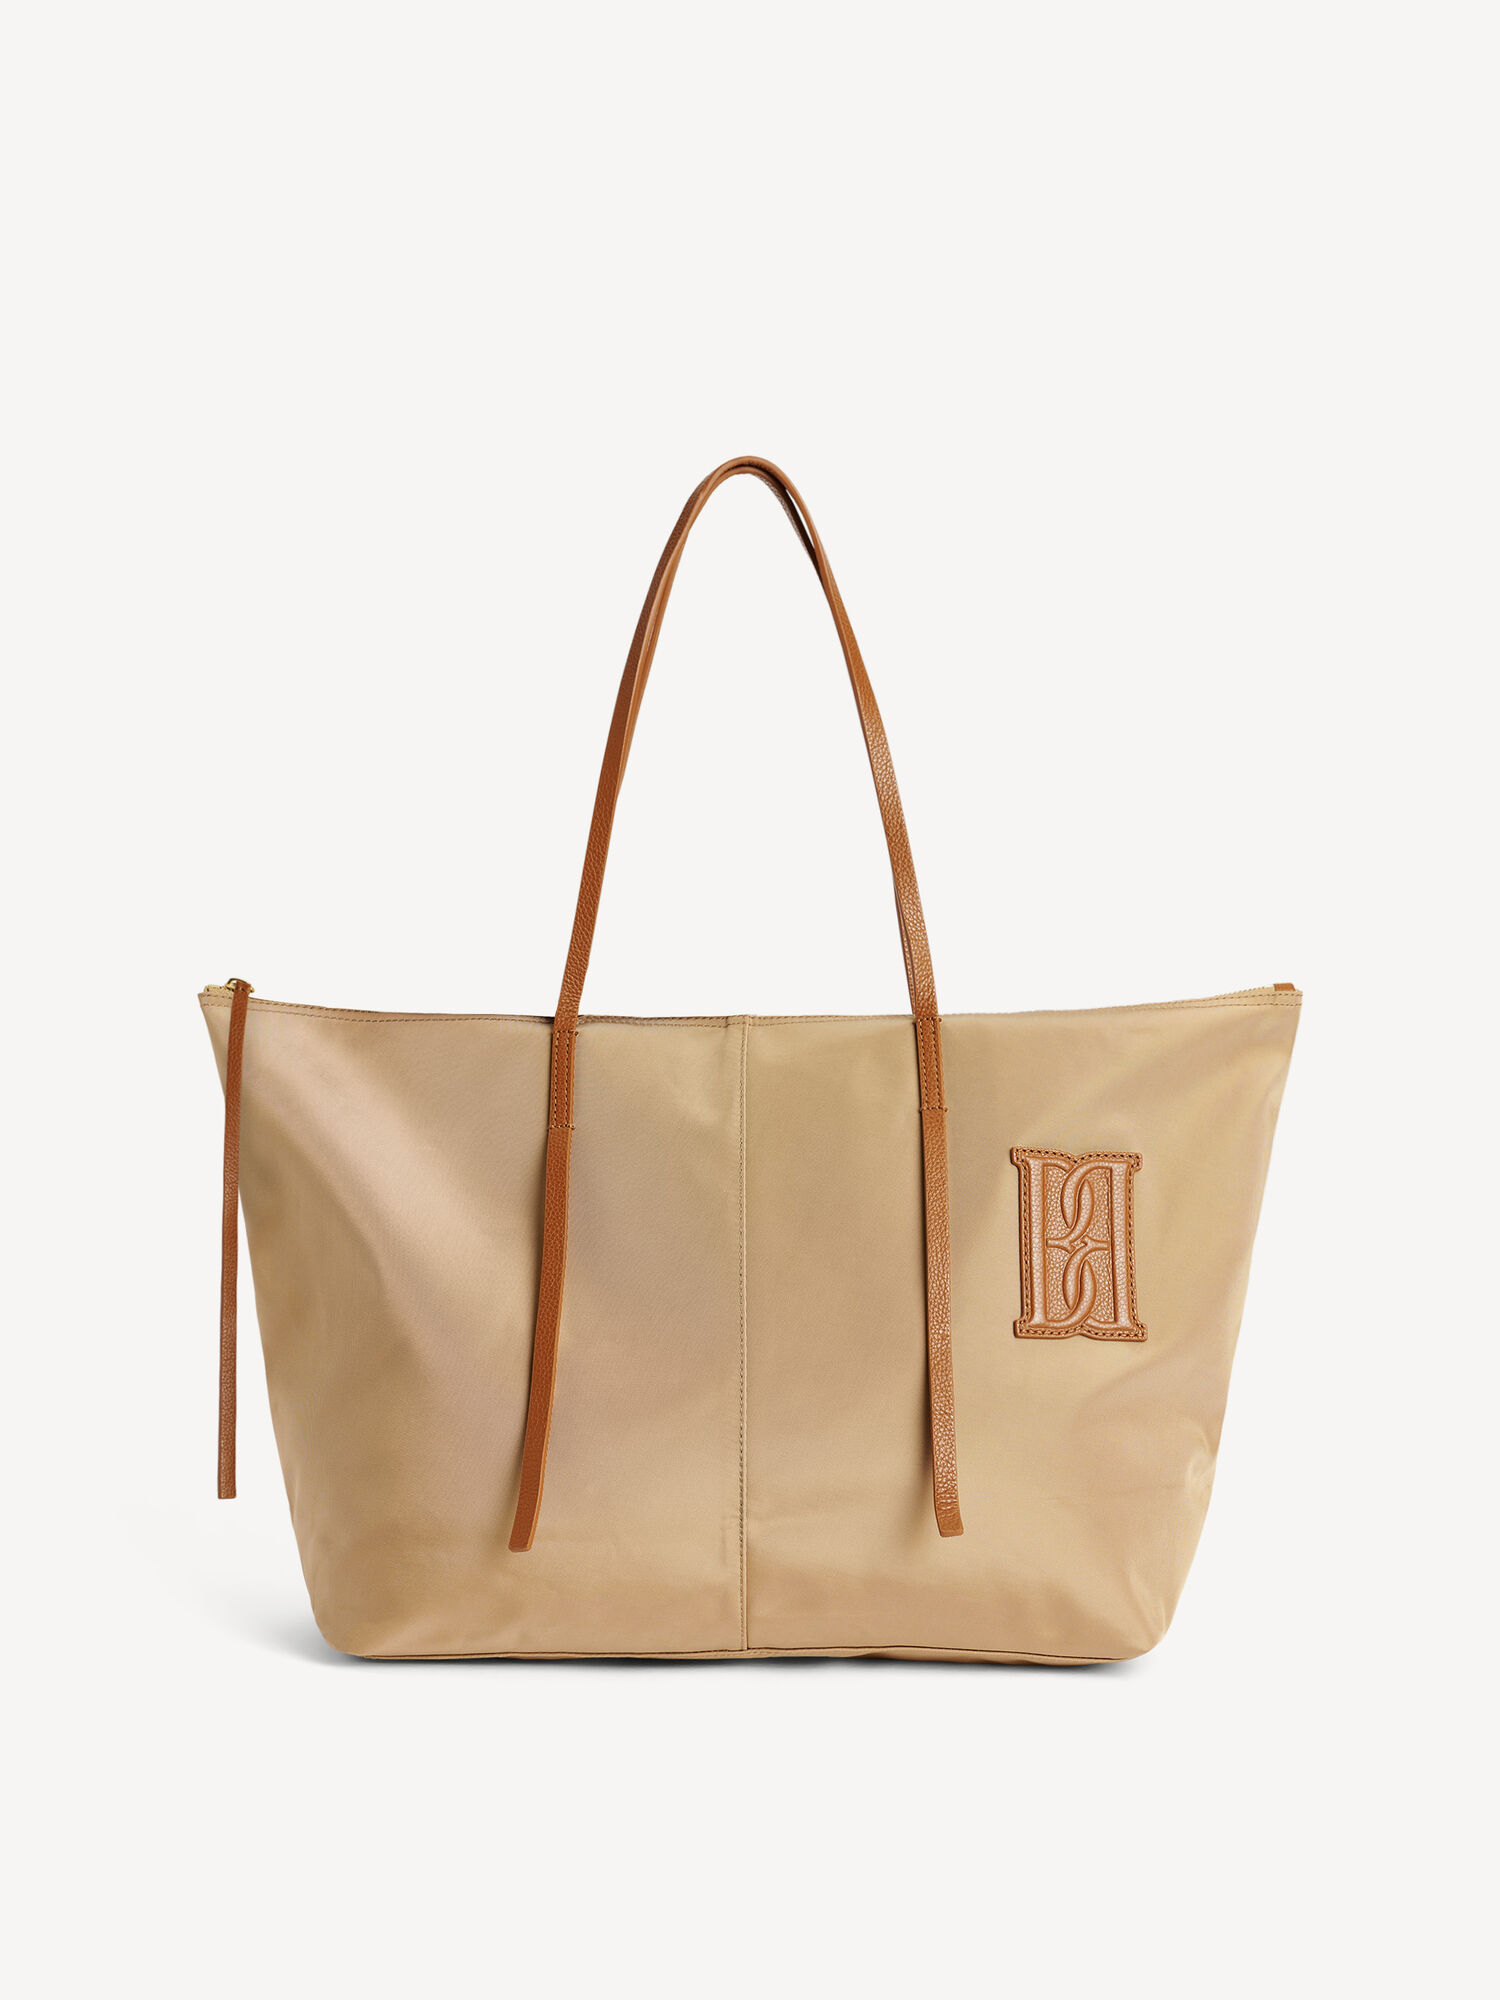 Nabelle tote